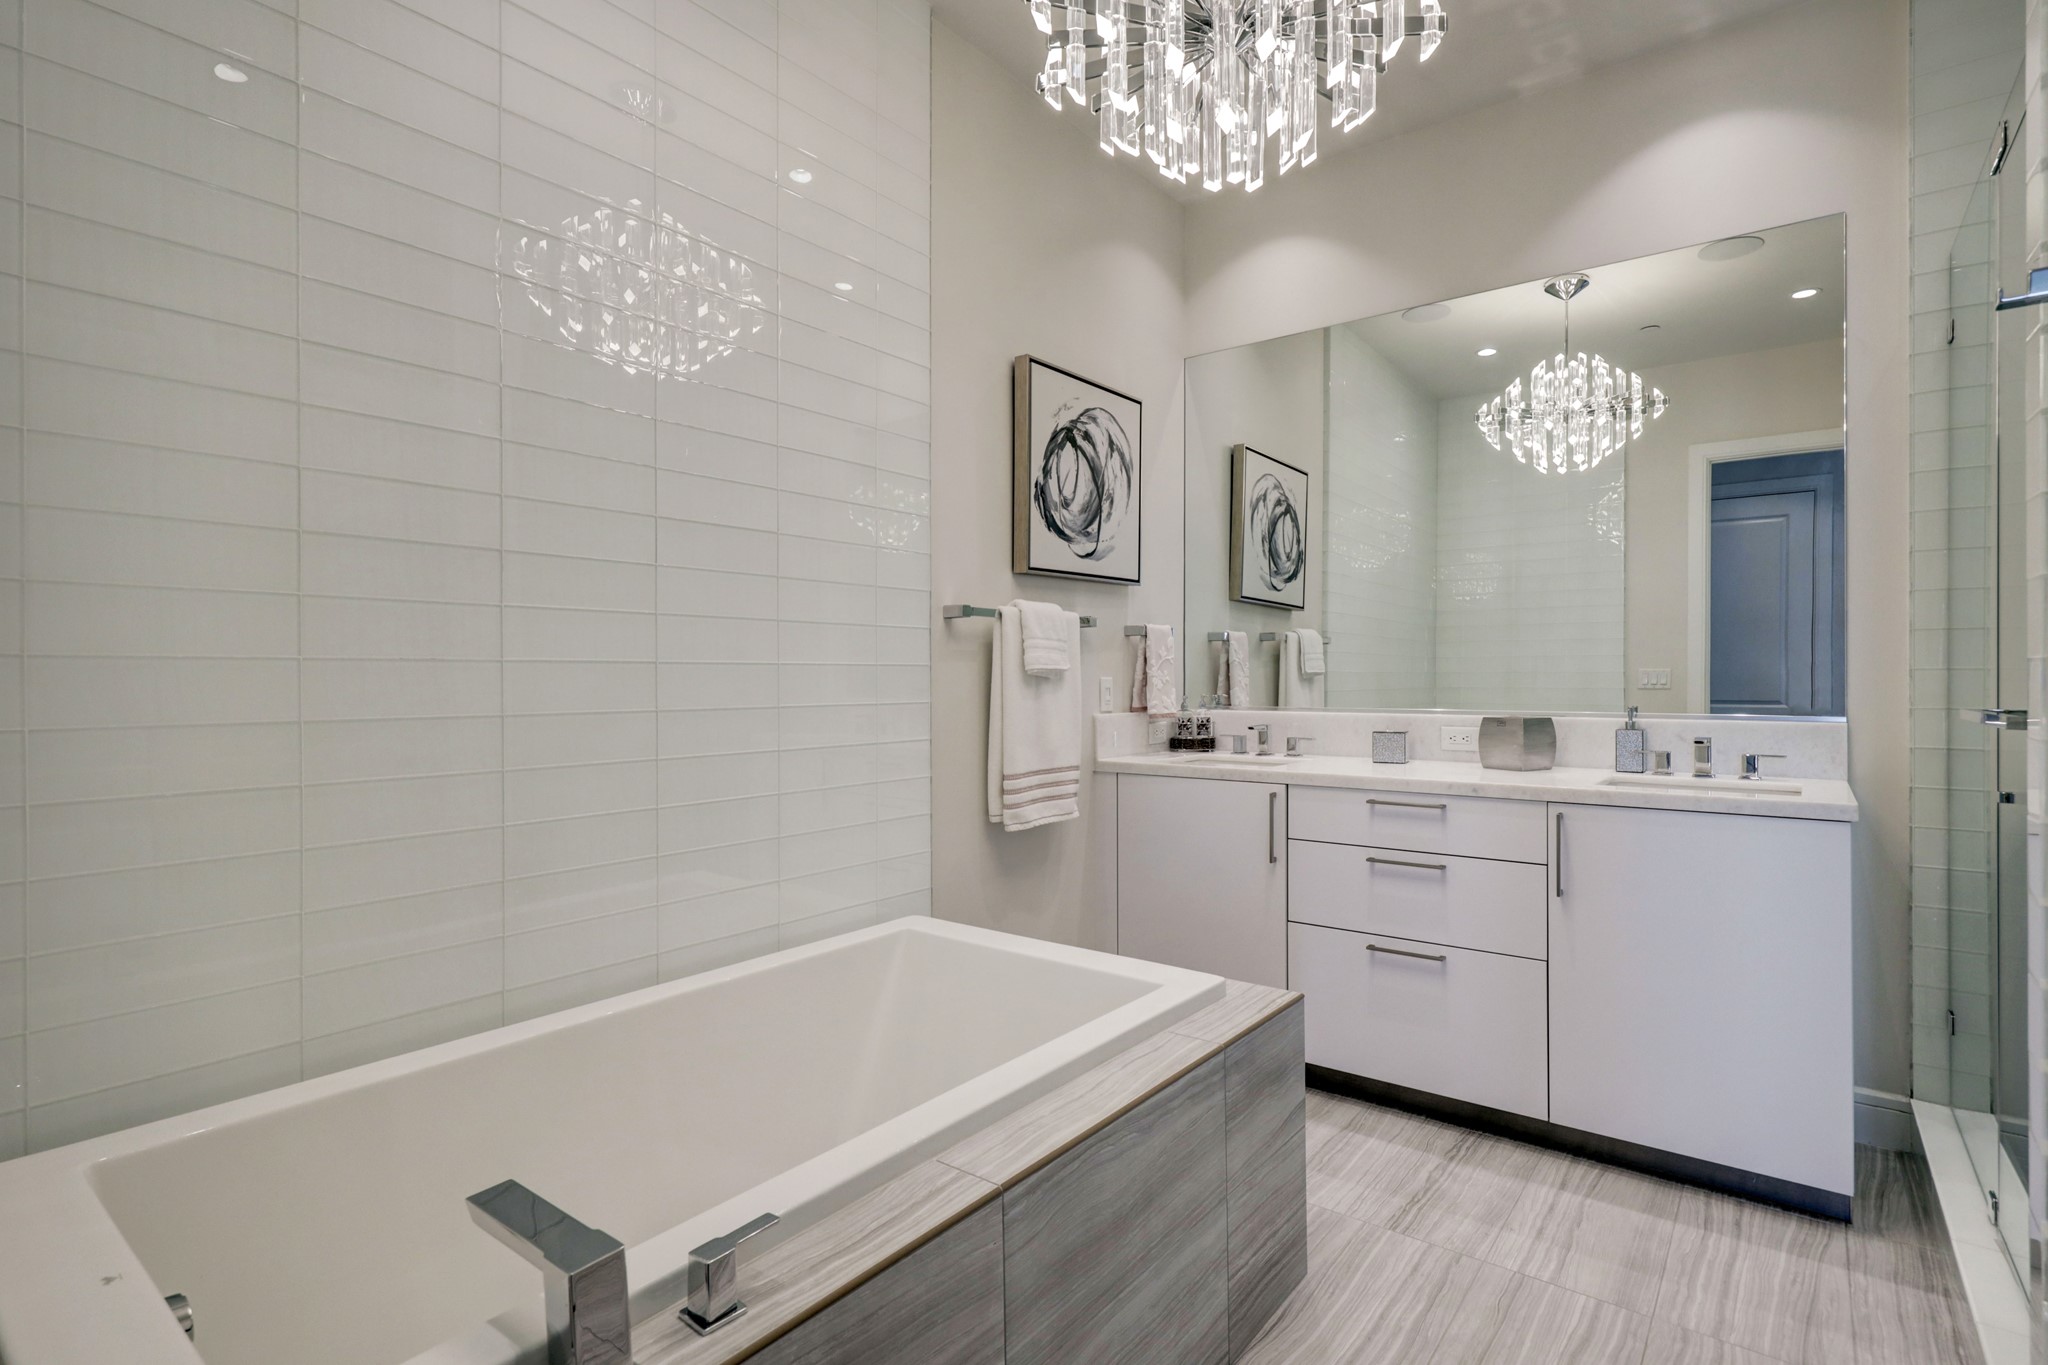 Primary Bathroom features tile floors, double vanity, large seamless glass shower and separate soaking tub.